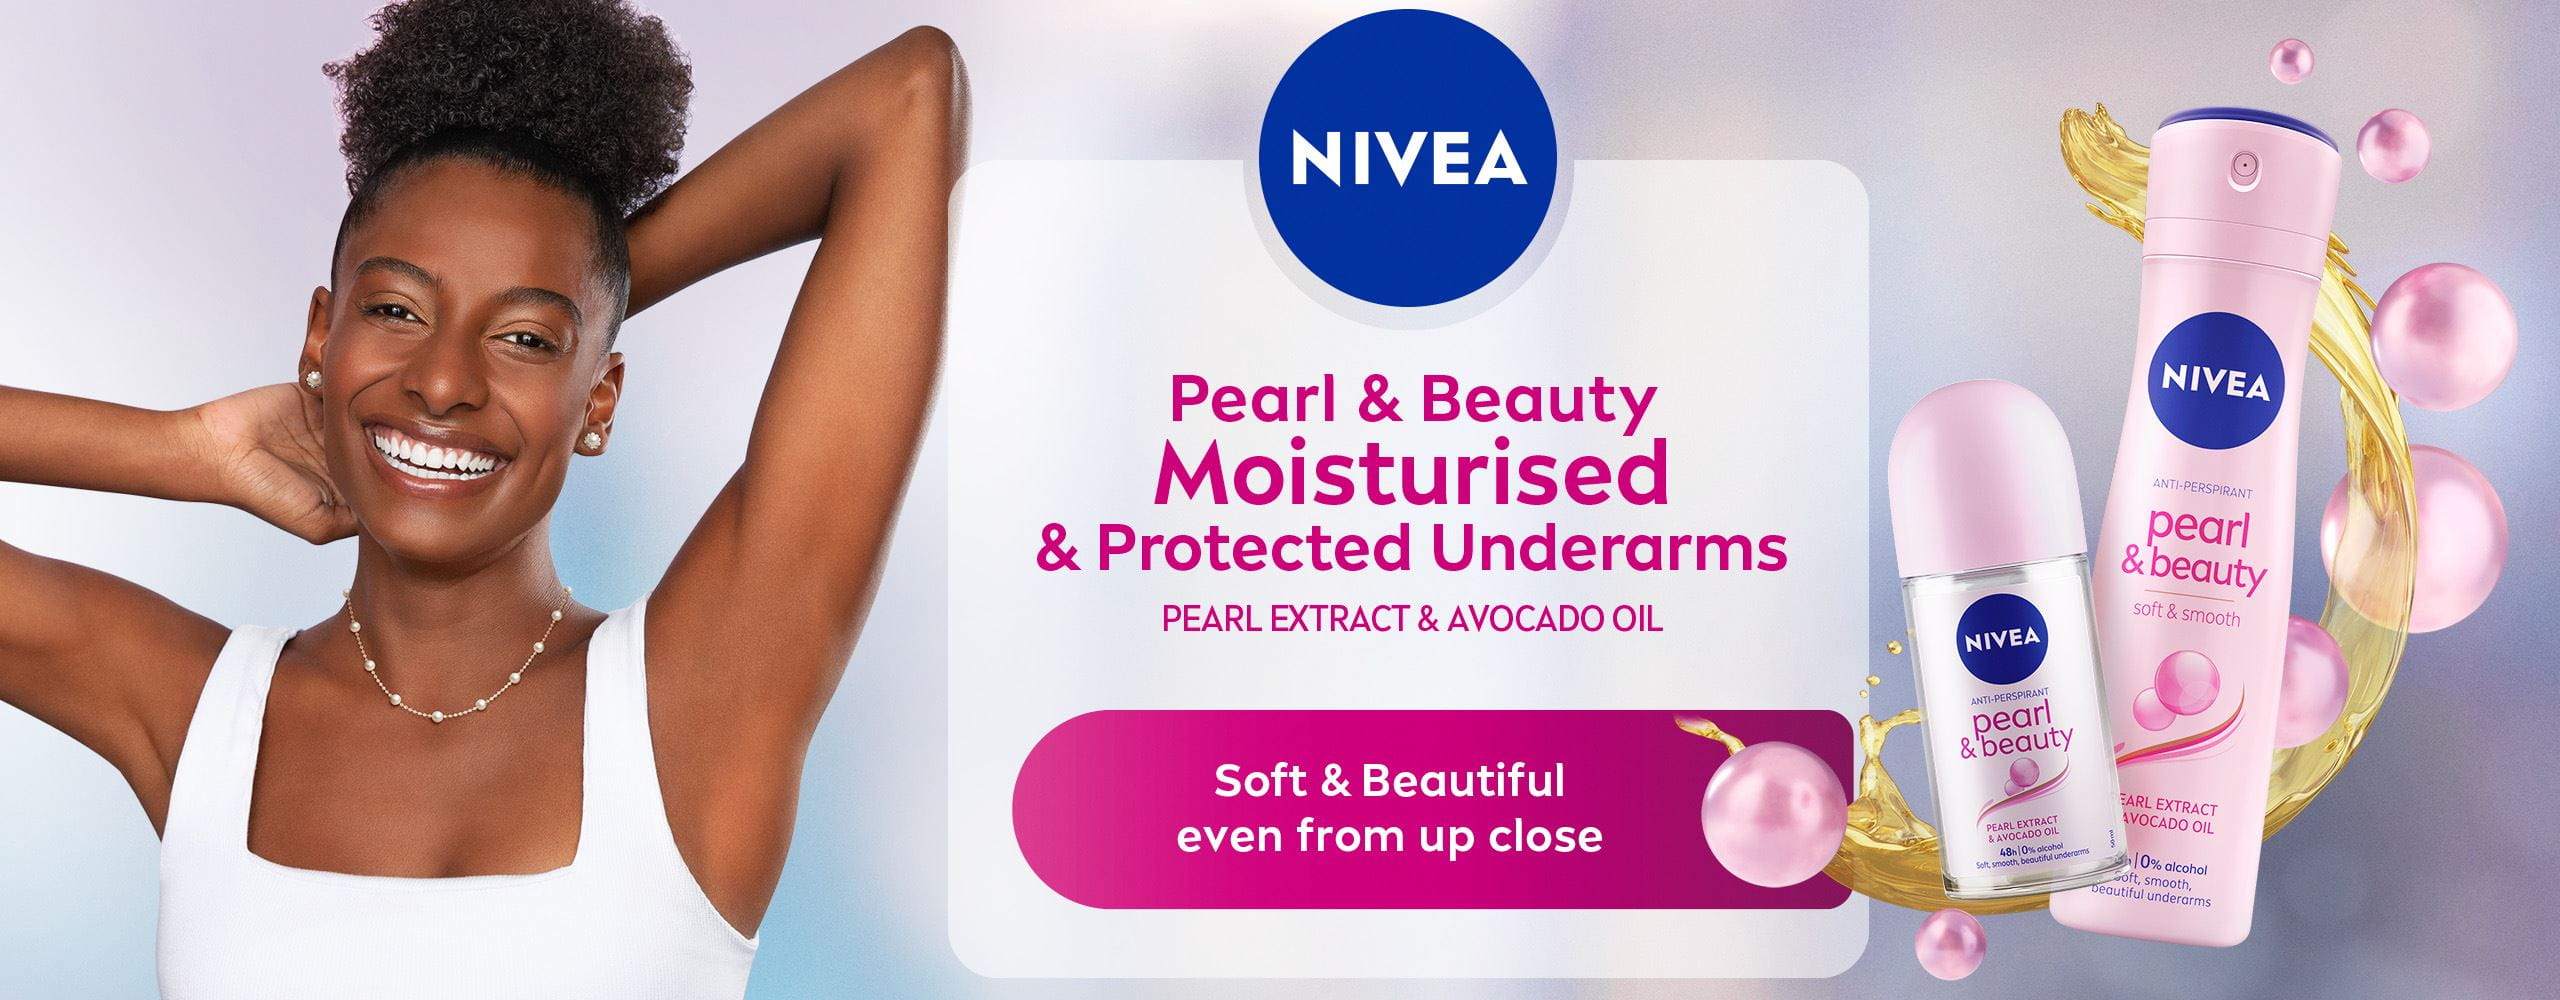 NIVEA Pearl & Beauty Deo with Pearl Extract and Avocado Oil